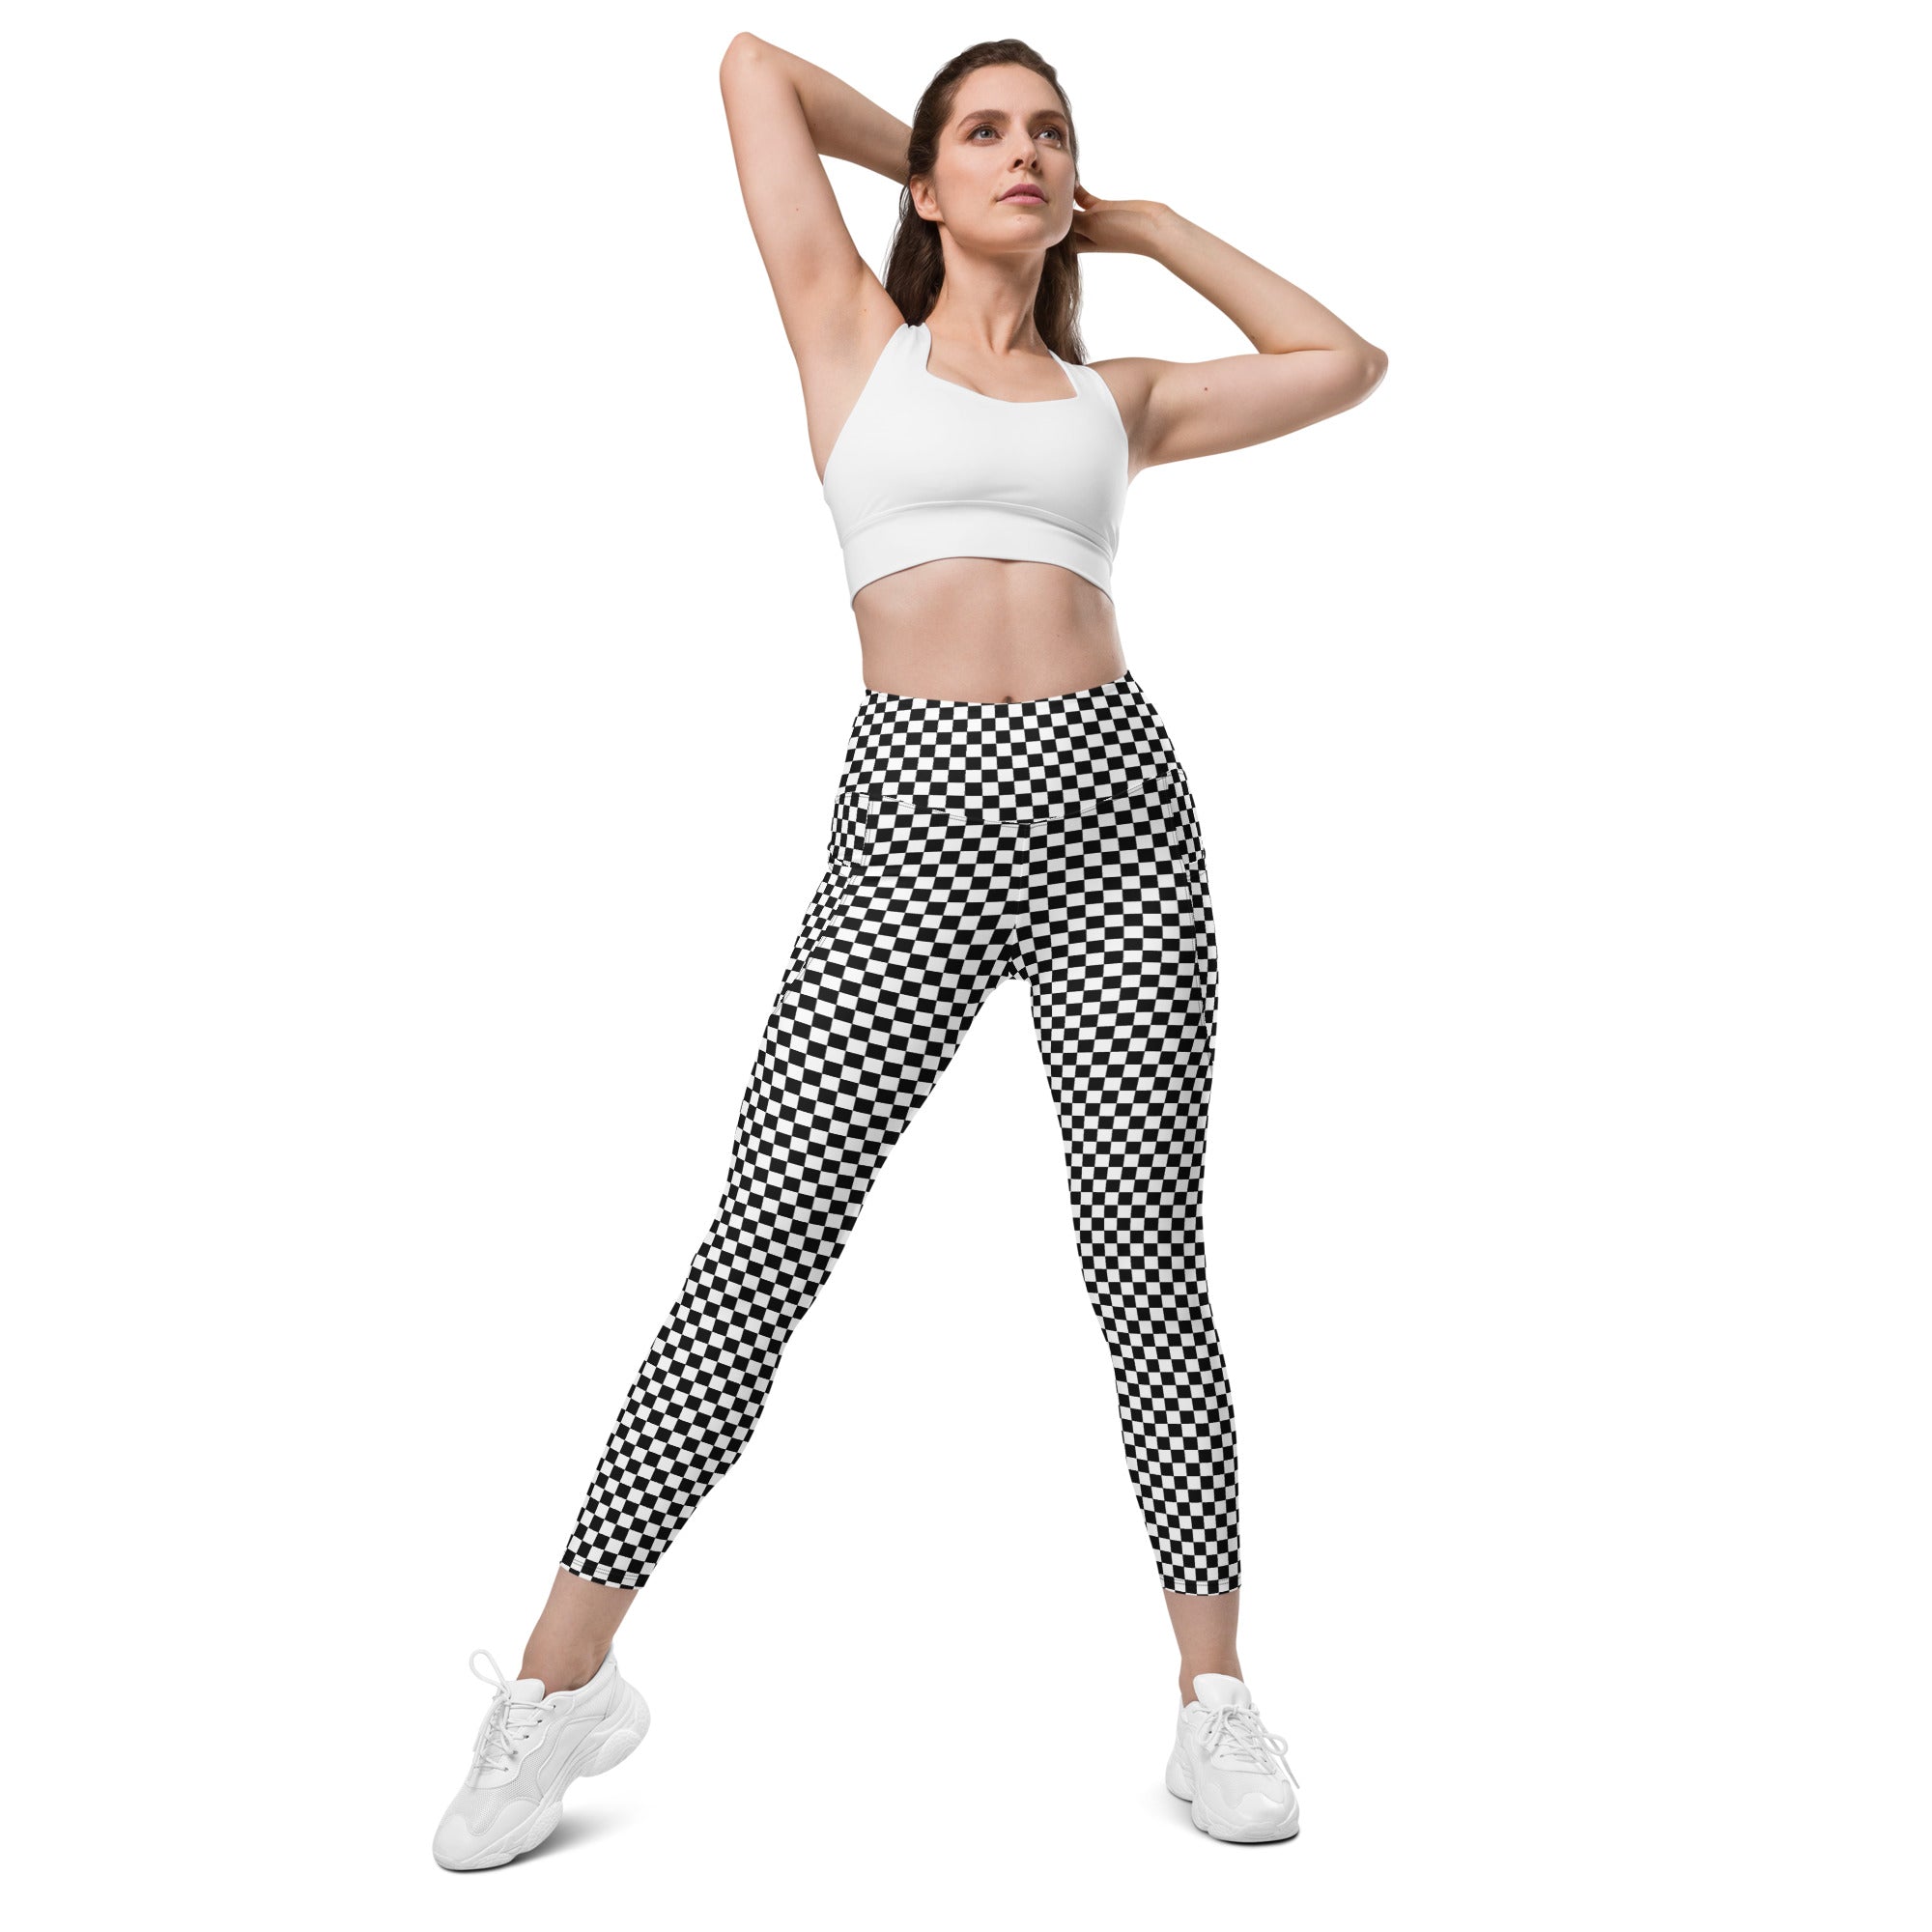 Checkered Leggings With Pockets